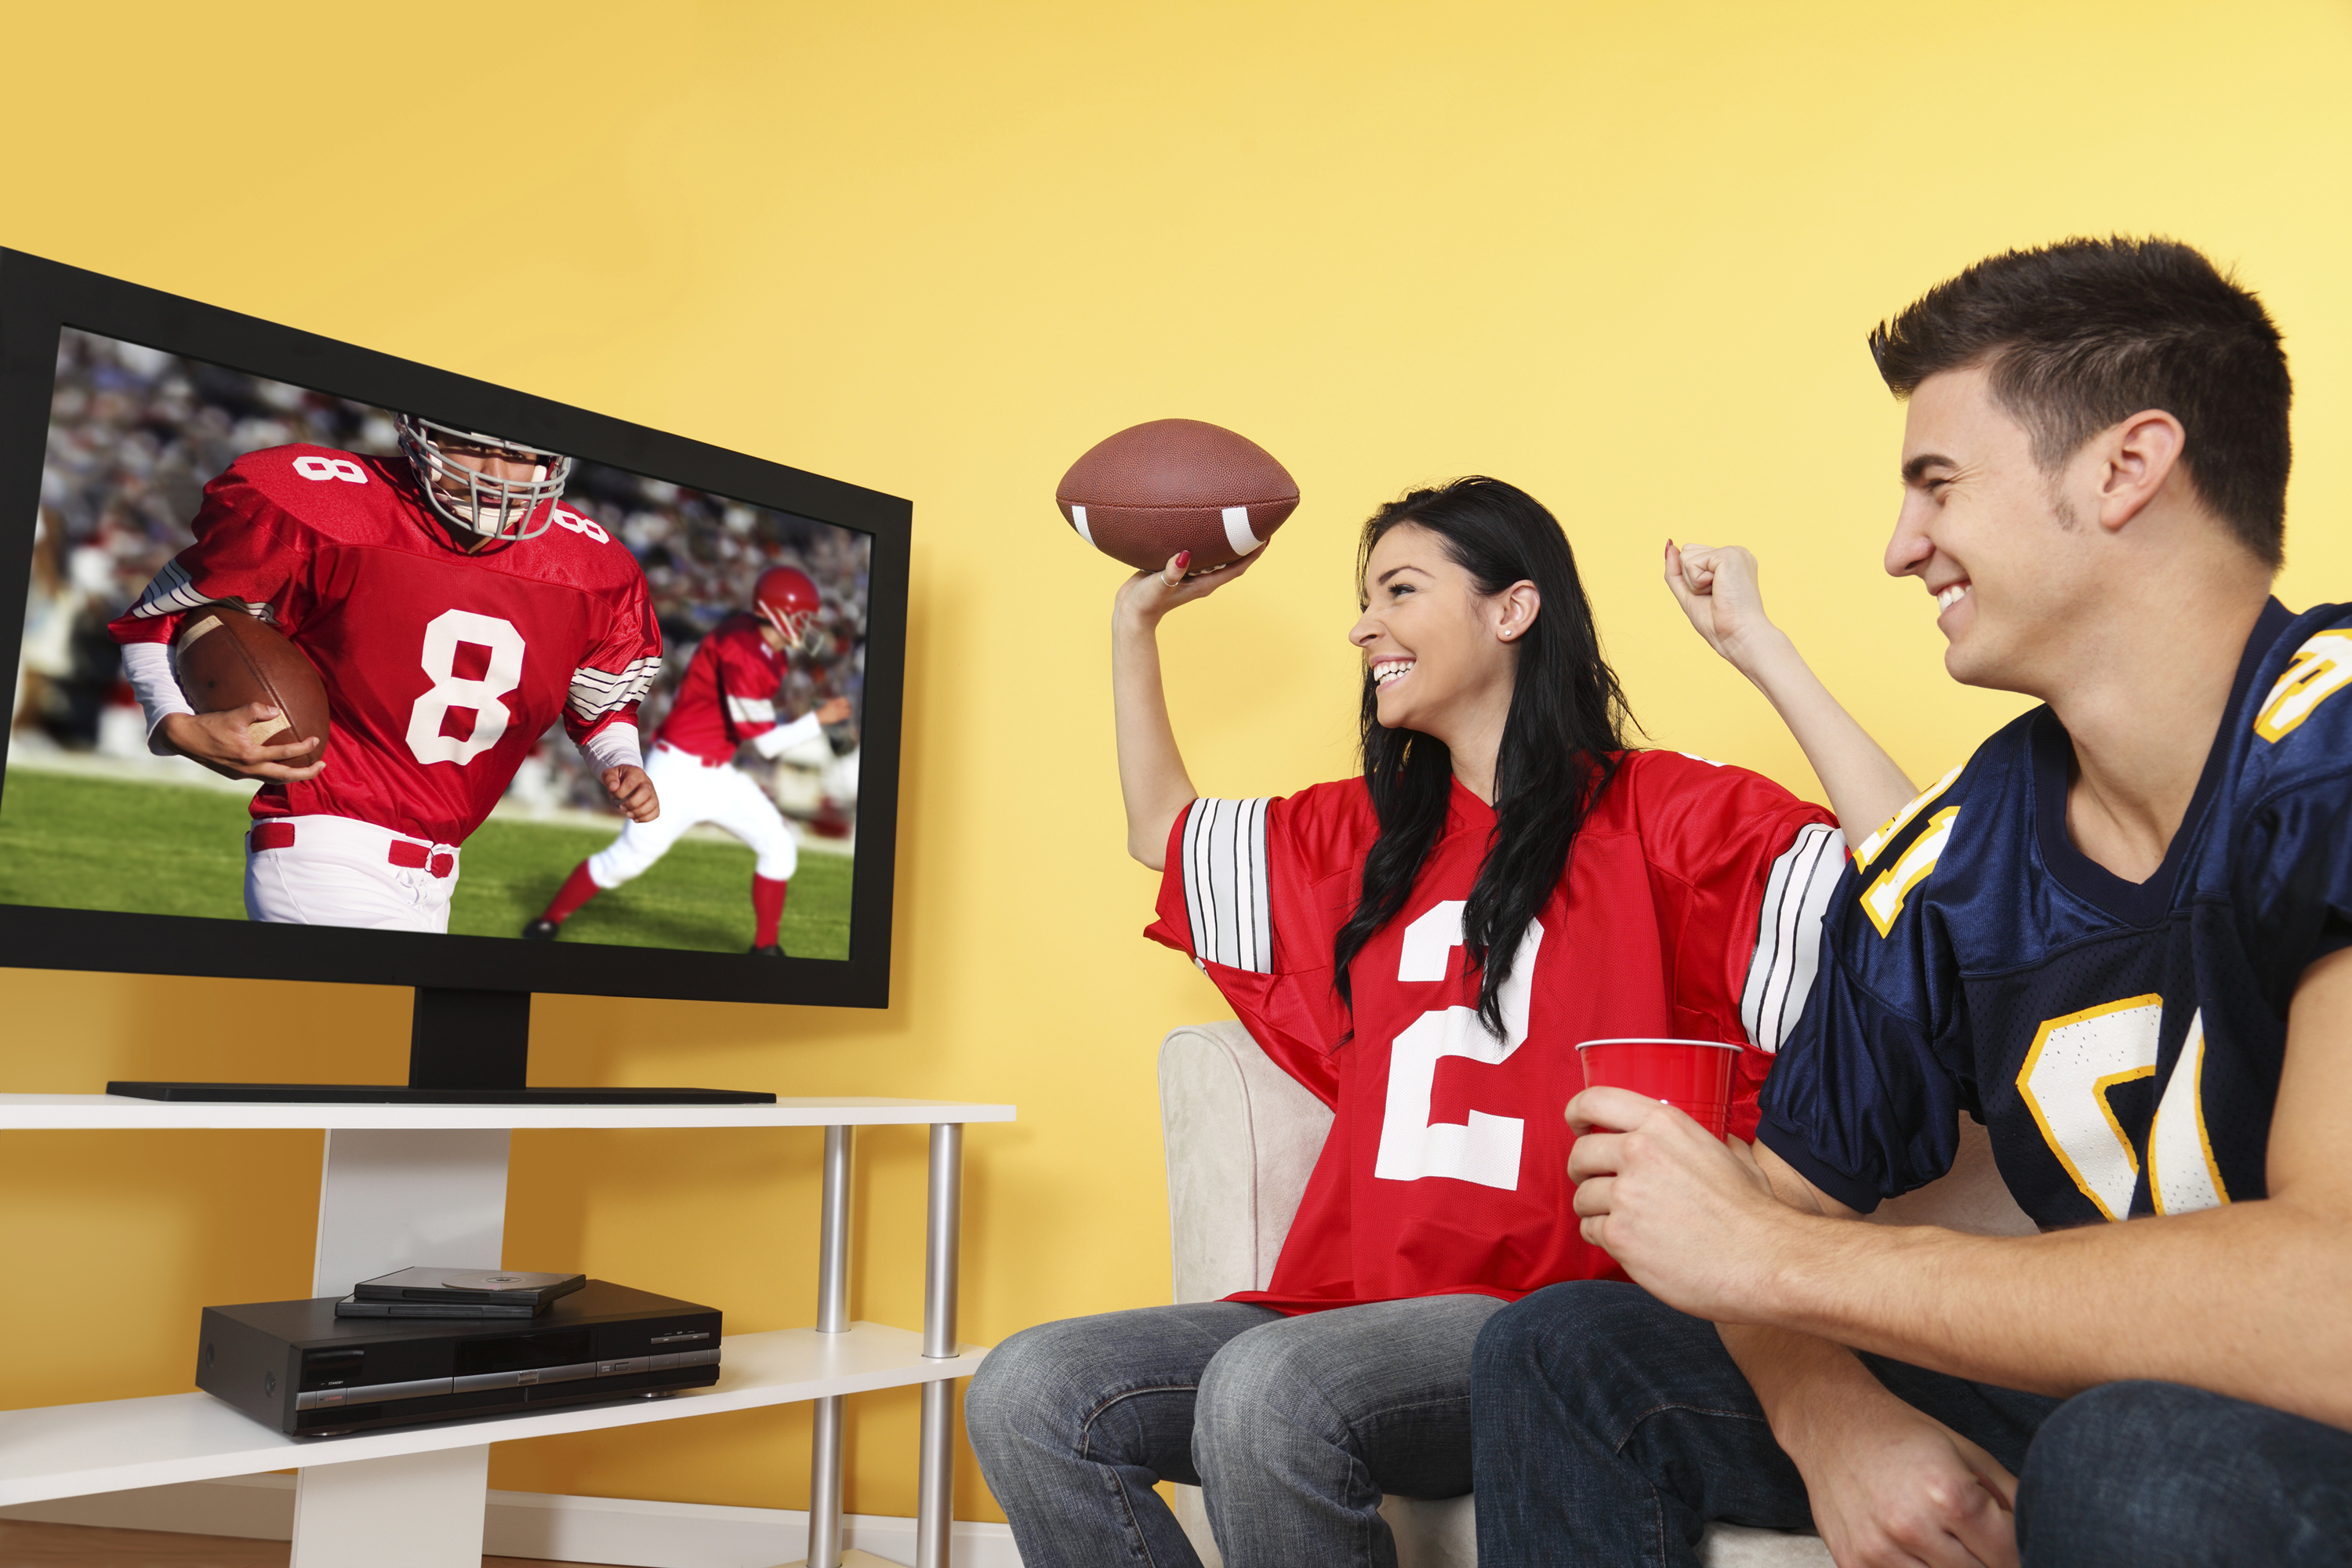 Fans watching a football game on TV. (iStock Photo)